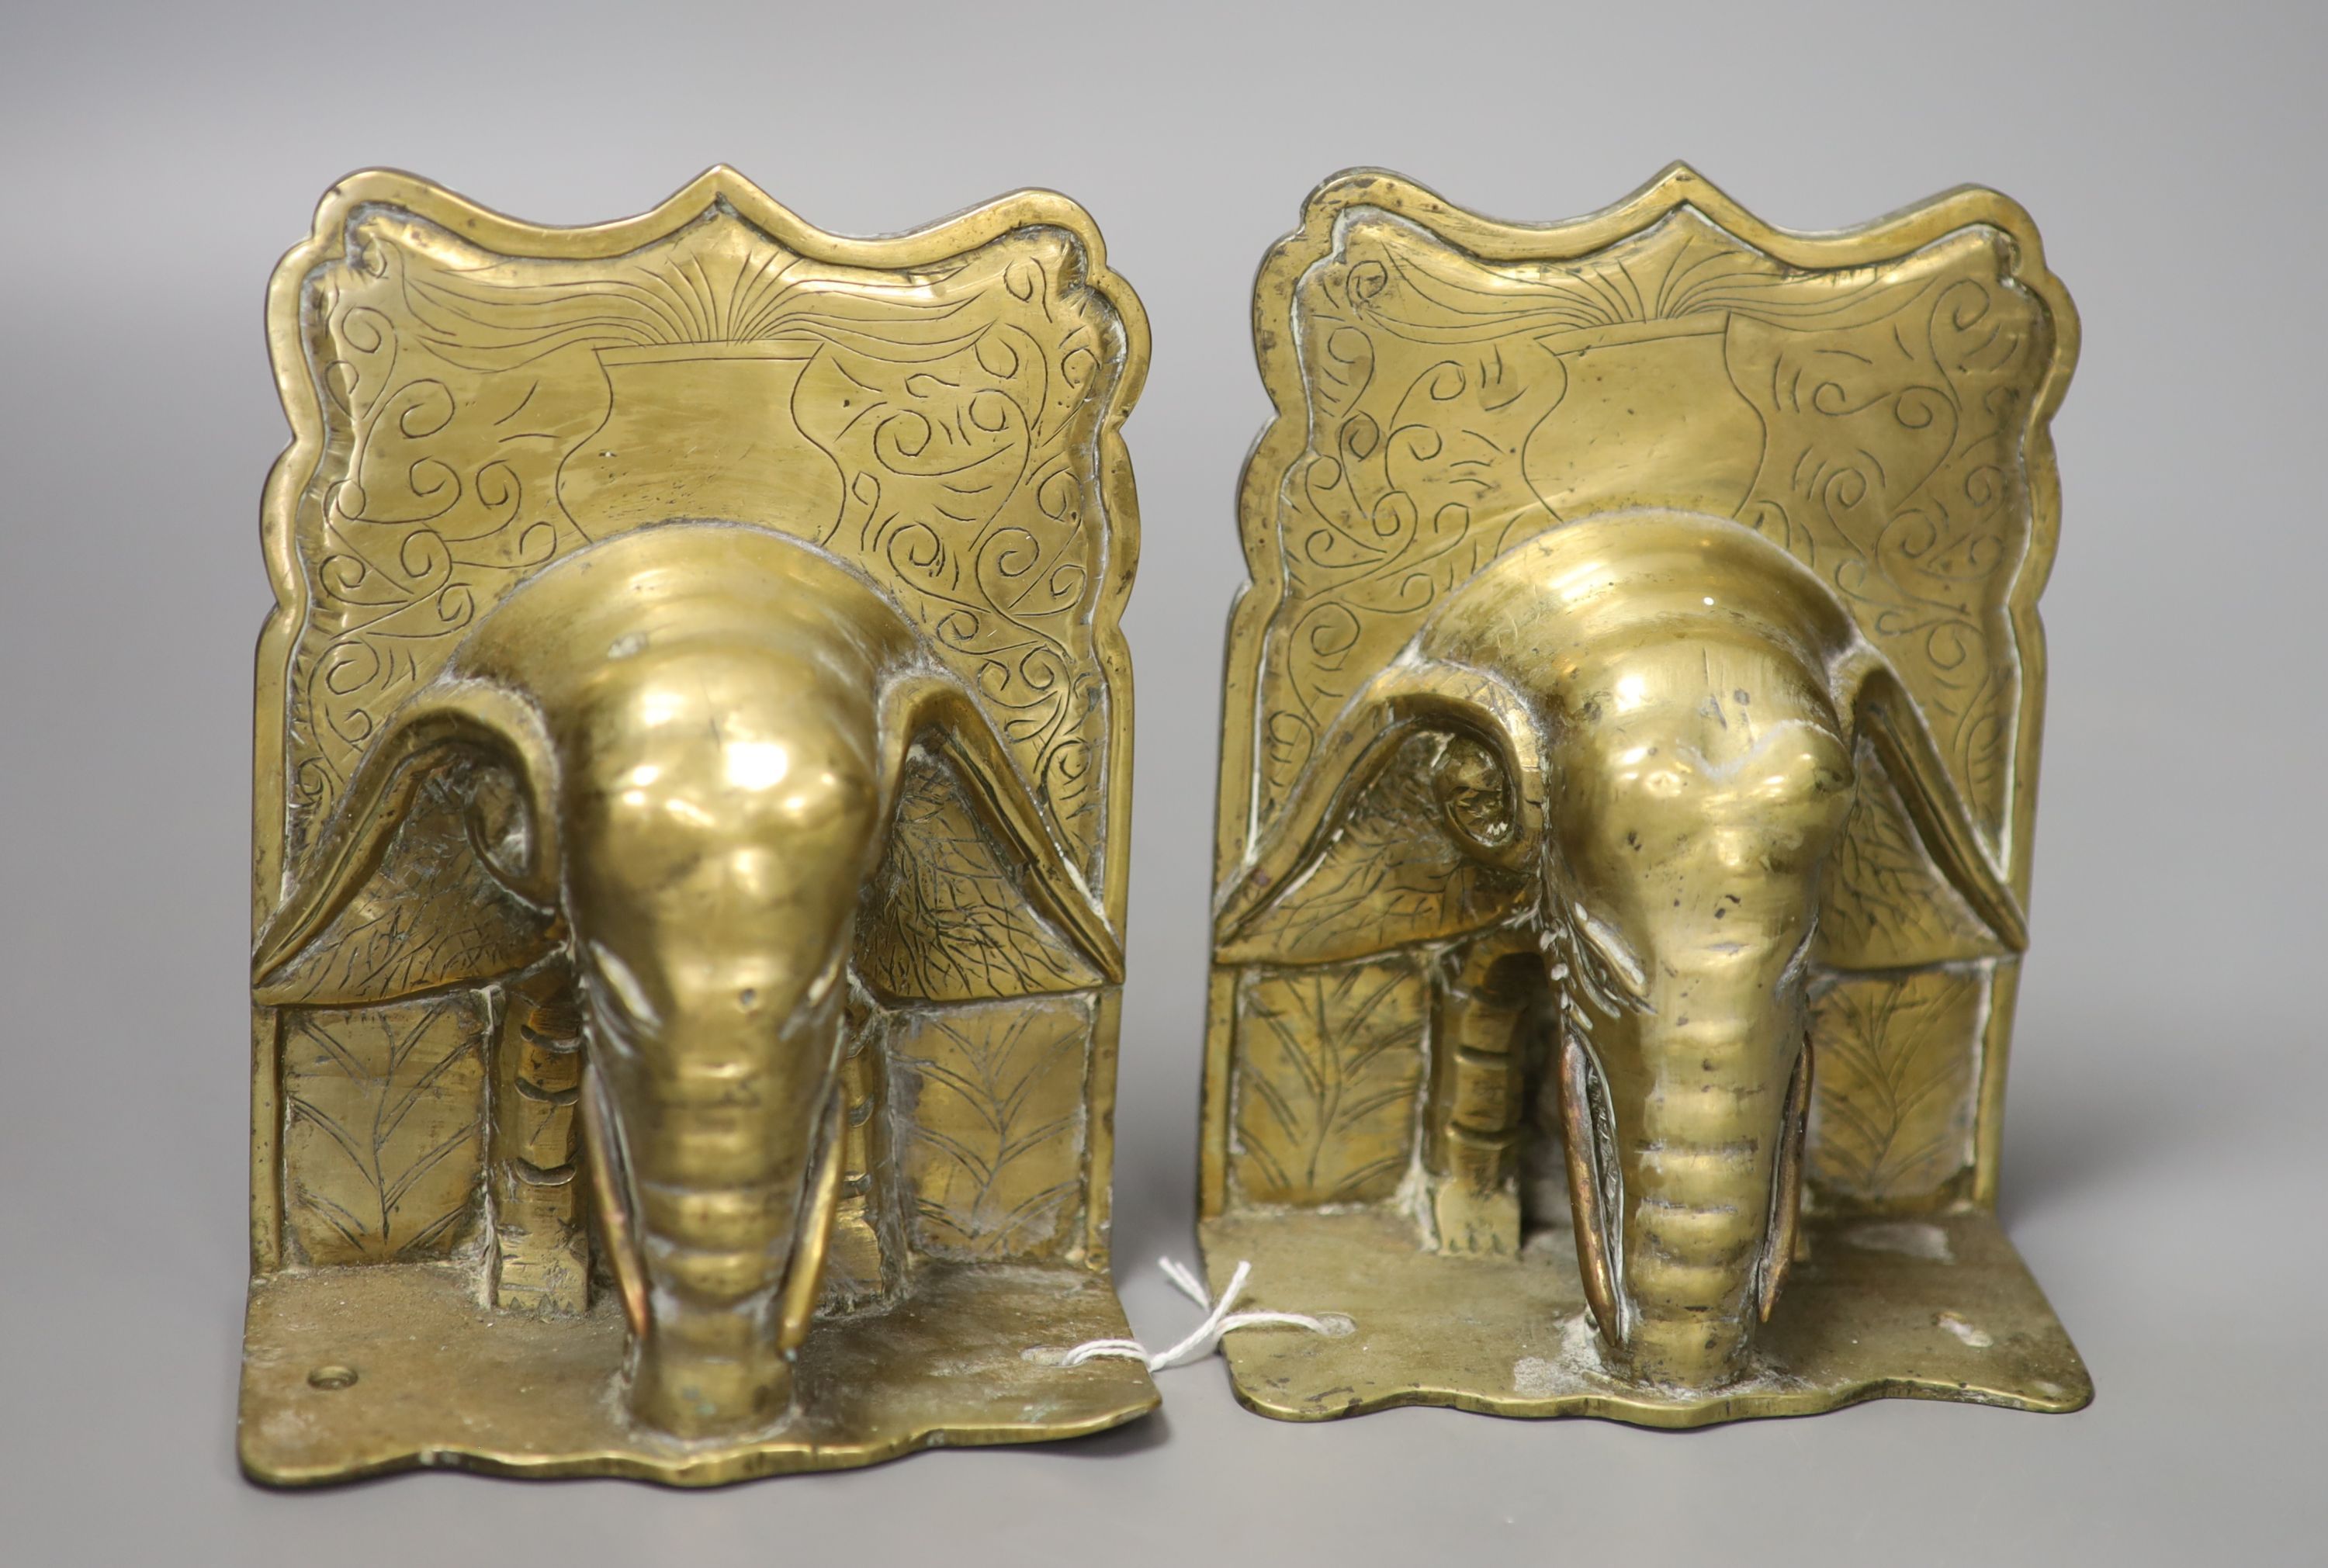 A decorative pair of early/mid 20th century Chinese brass bookends in the form of elephants, height 15cm